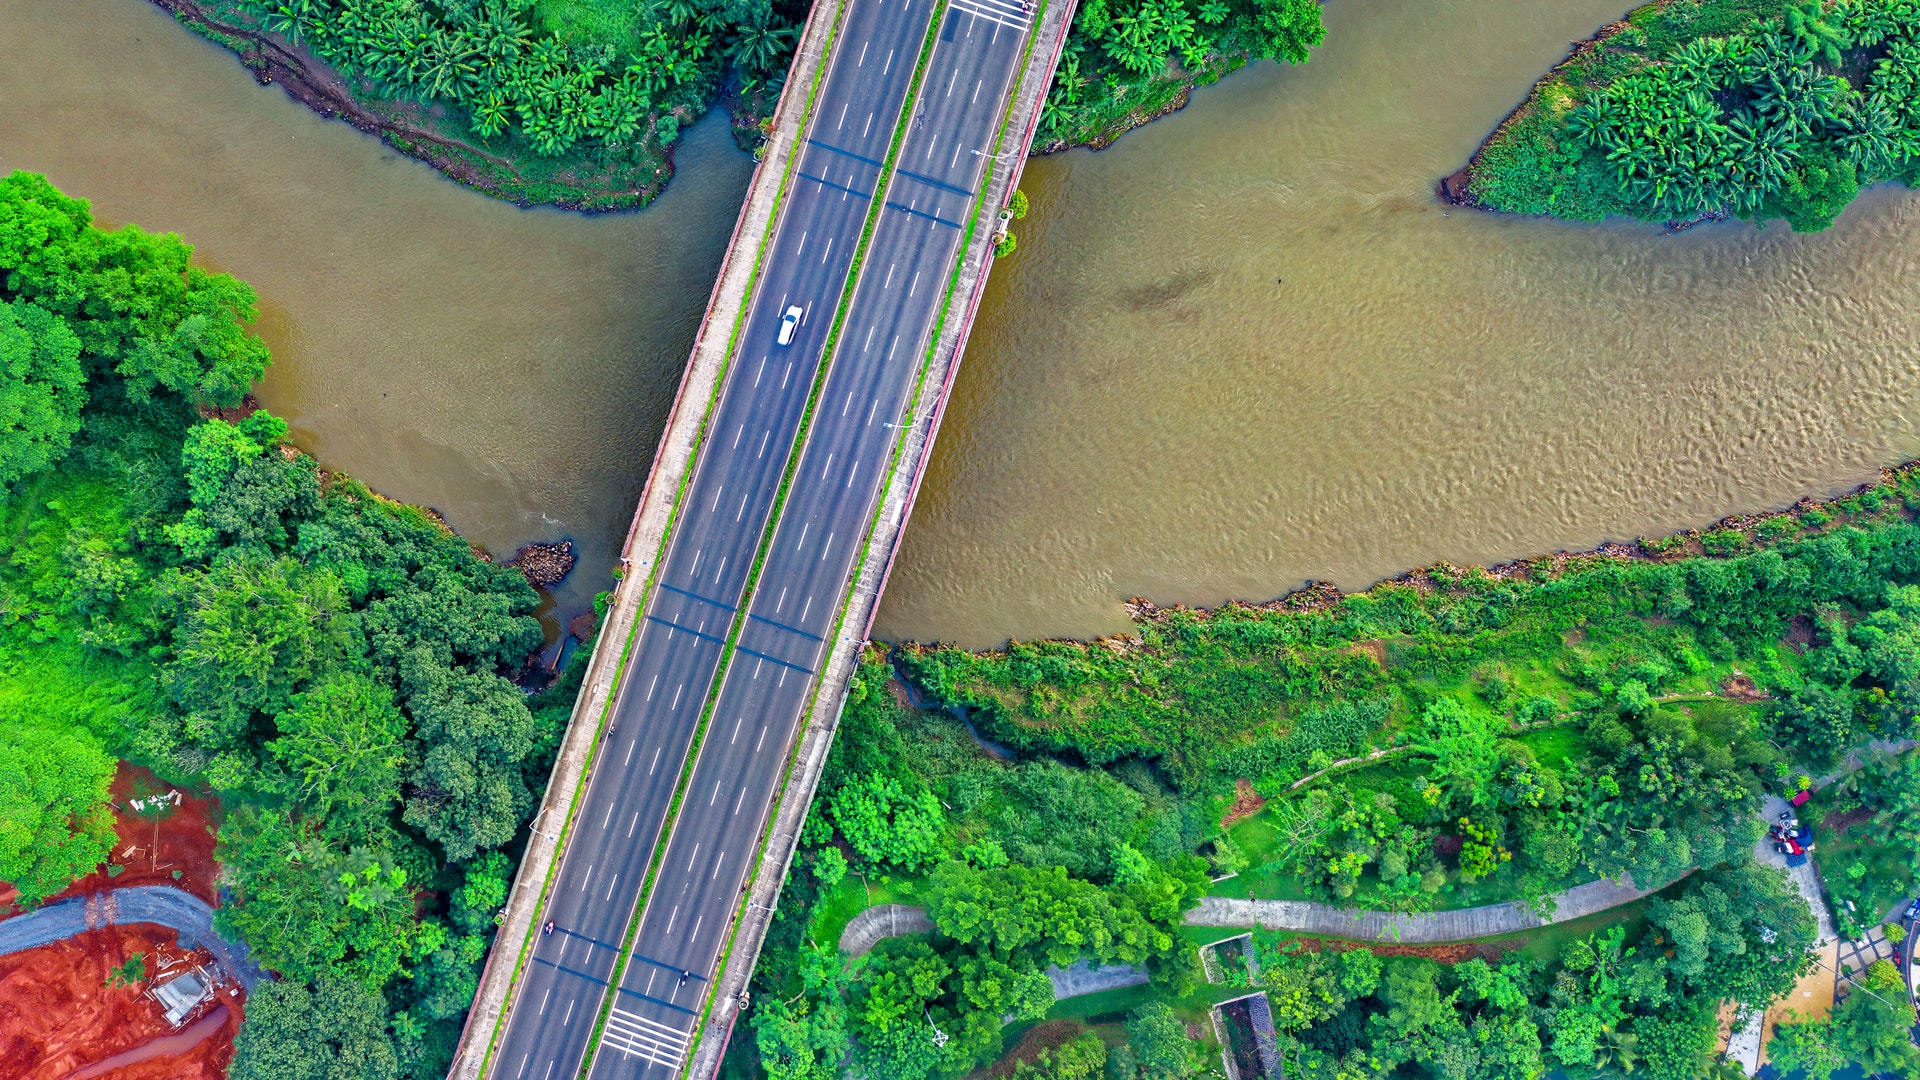 General 1920x1080 aerial view highway road trees car bridge river forest palm trees nature landscape traffic